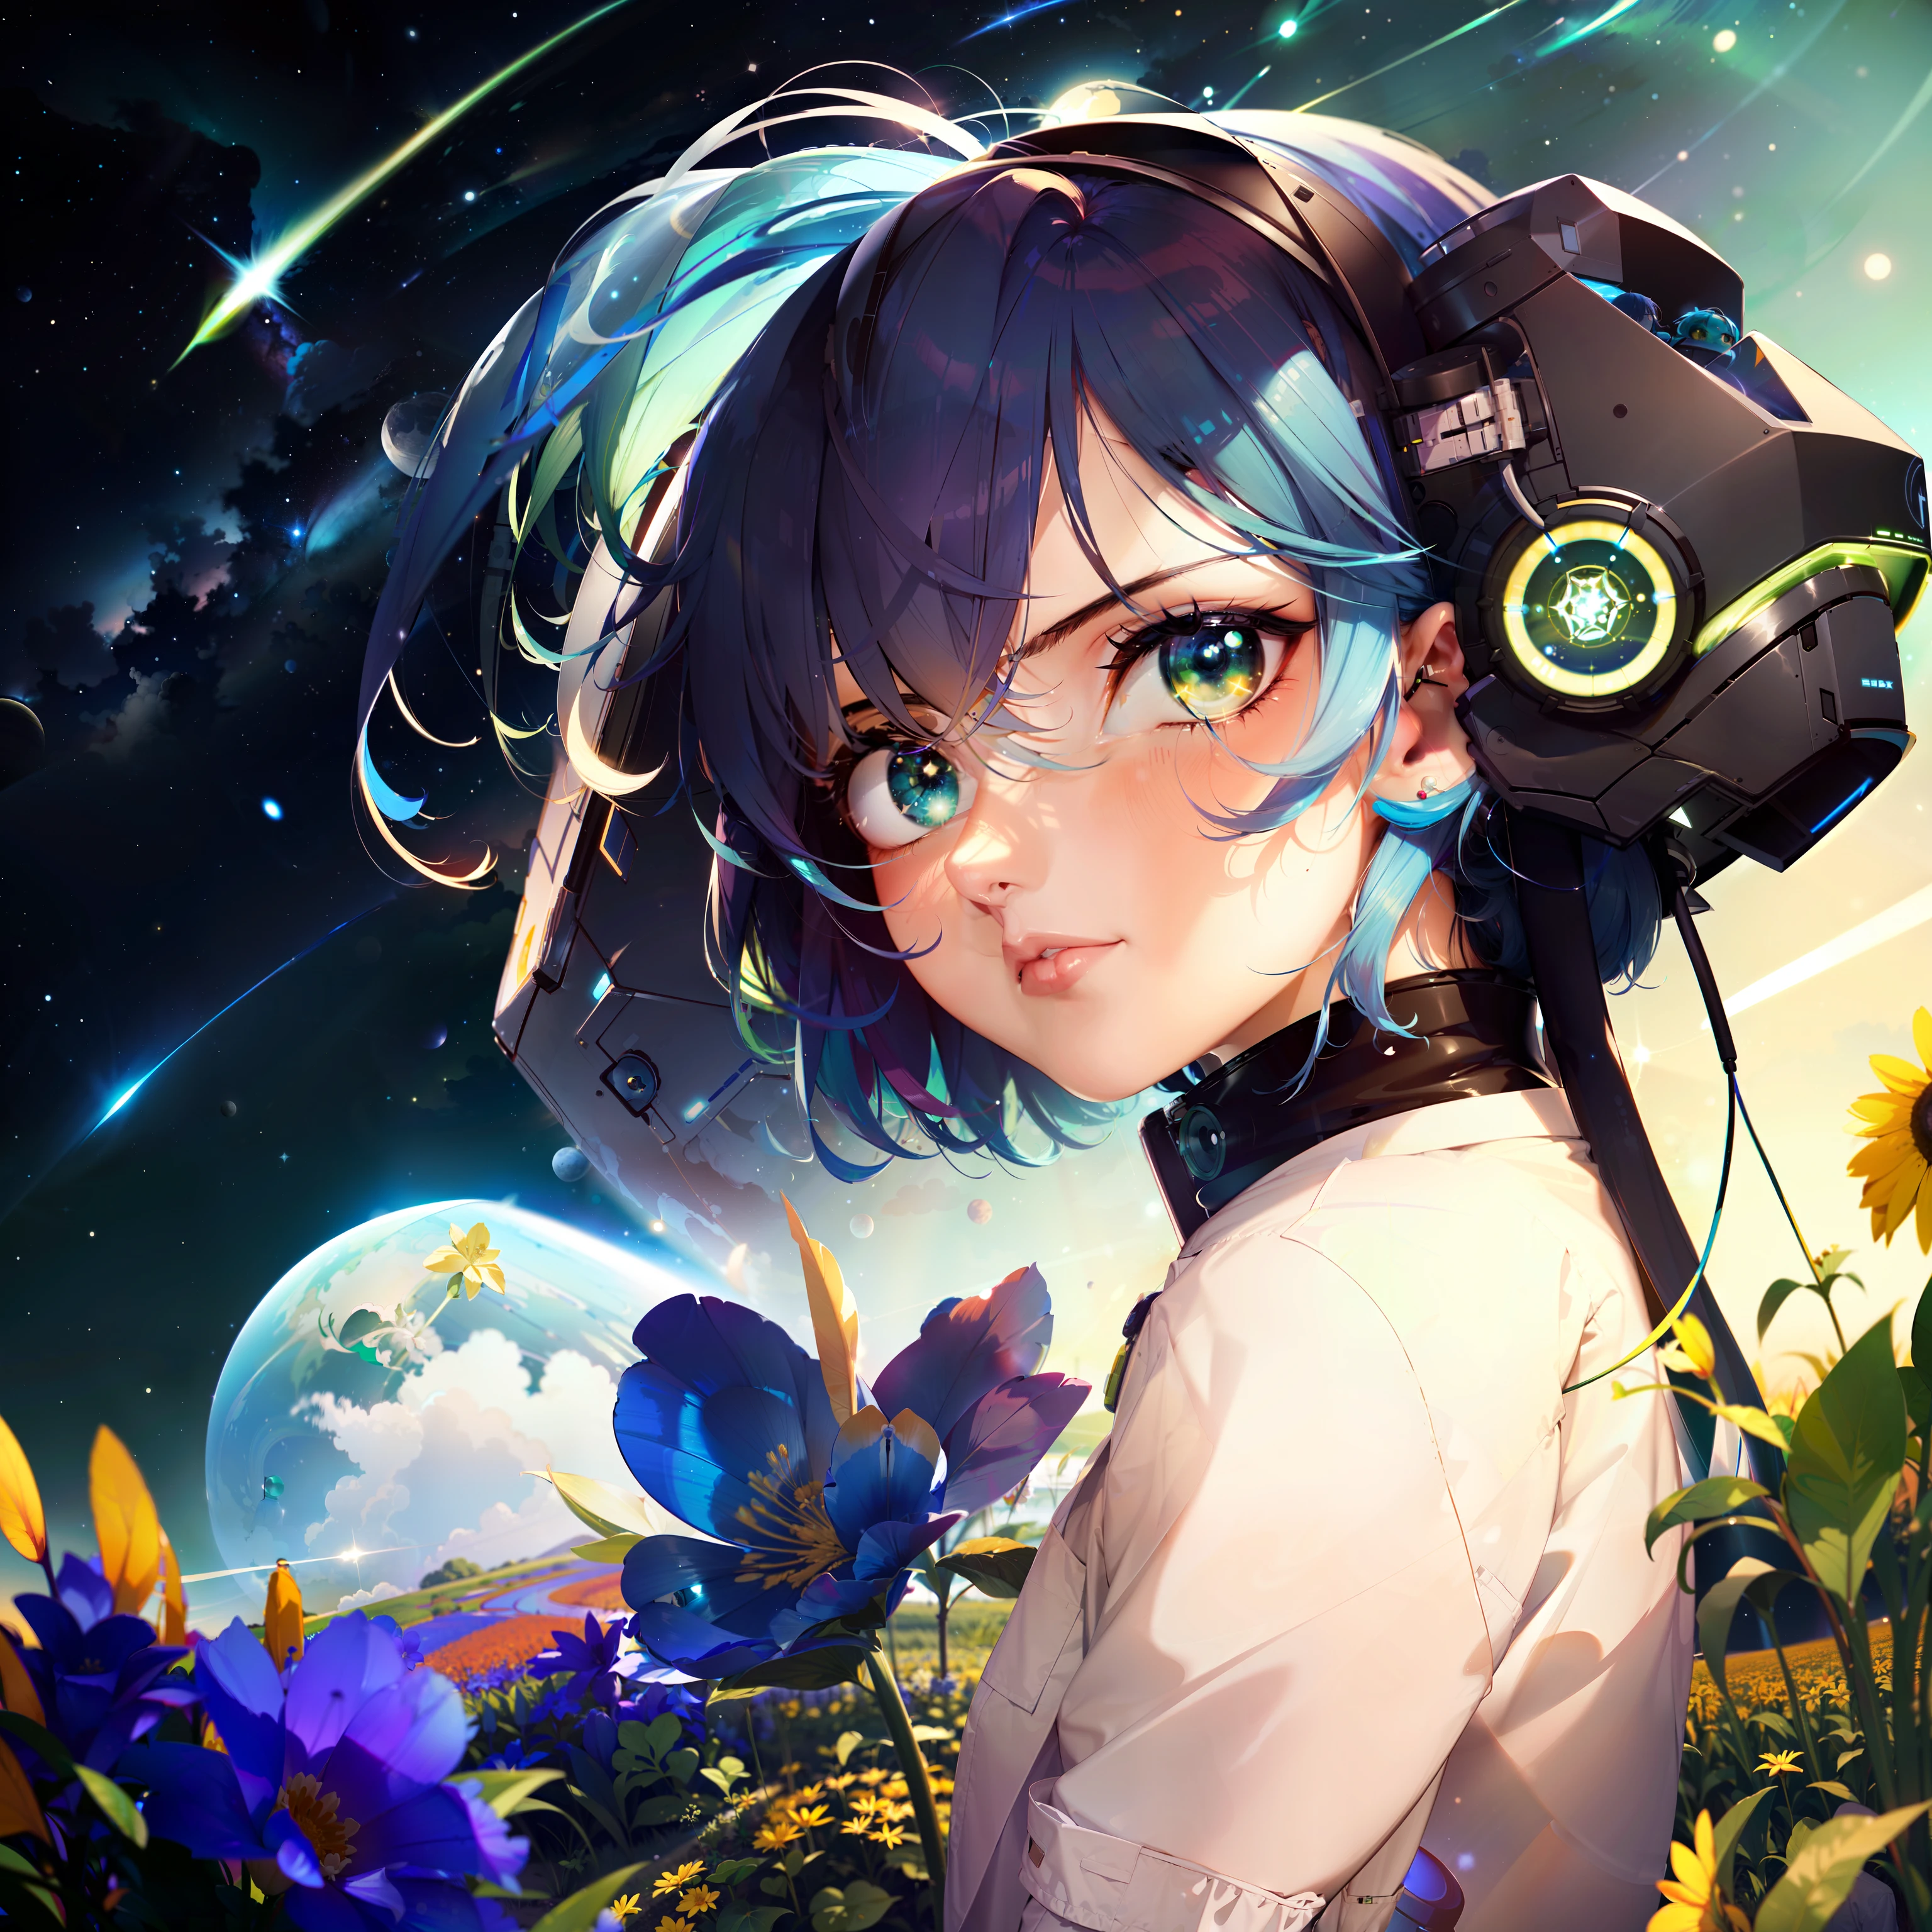 scientist, bright green, stern lifeless stare, with blue hair, in a long white lab coat, short hair, standing in flower field on another planet, space sky